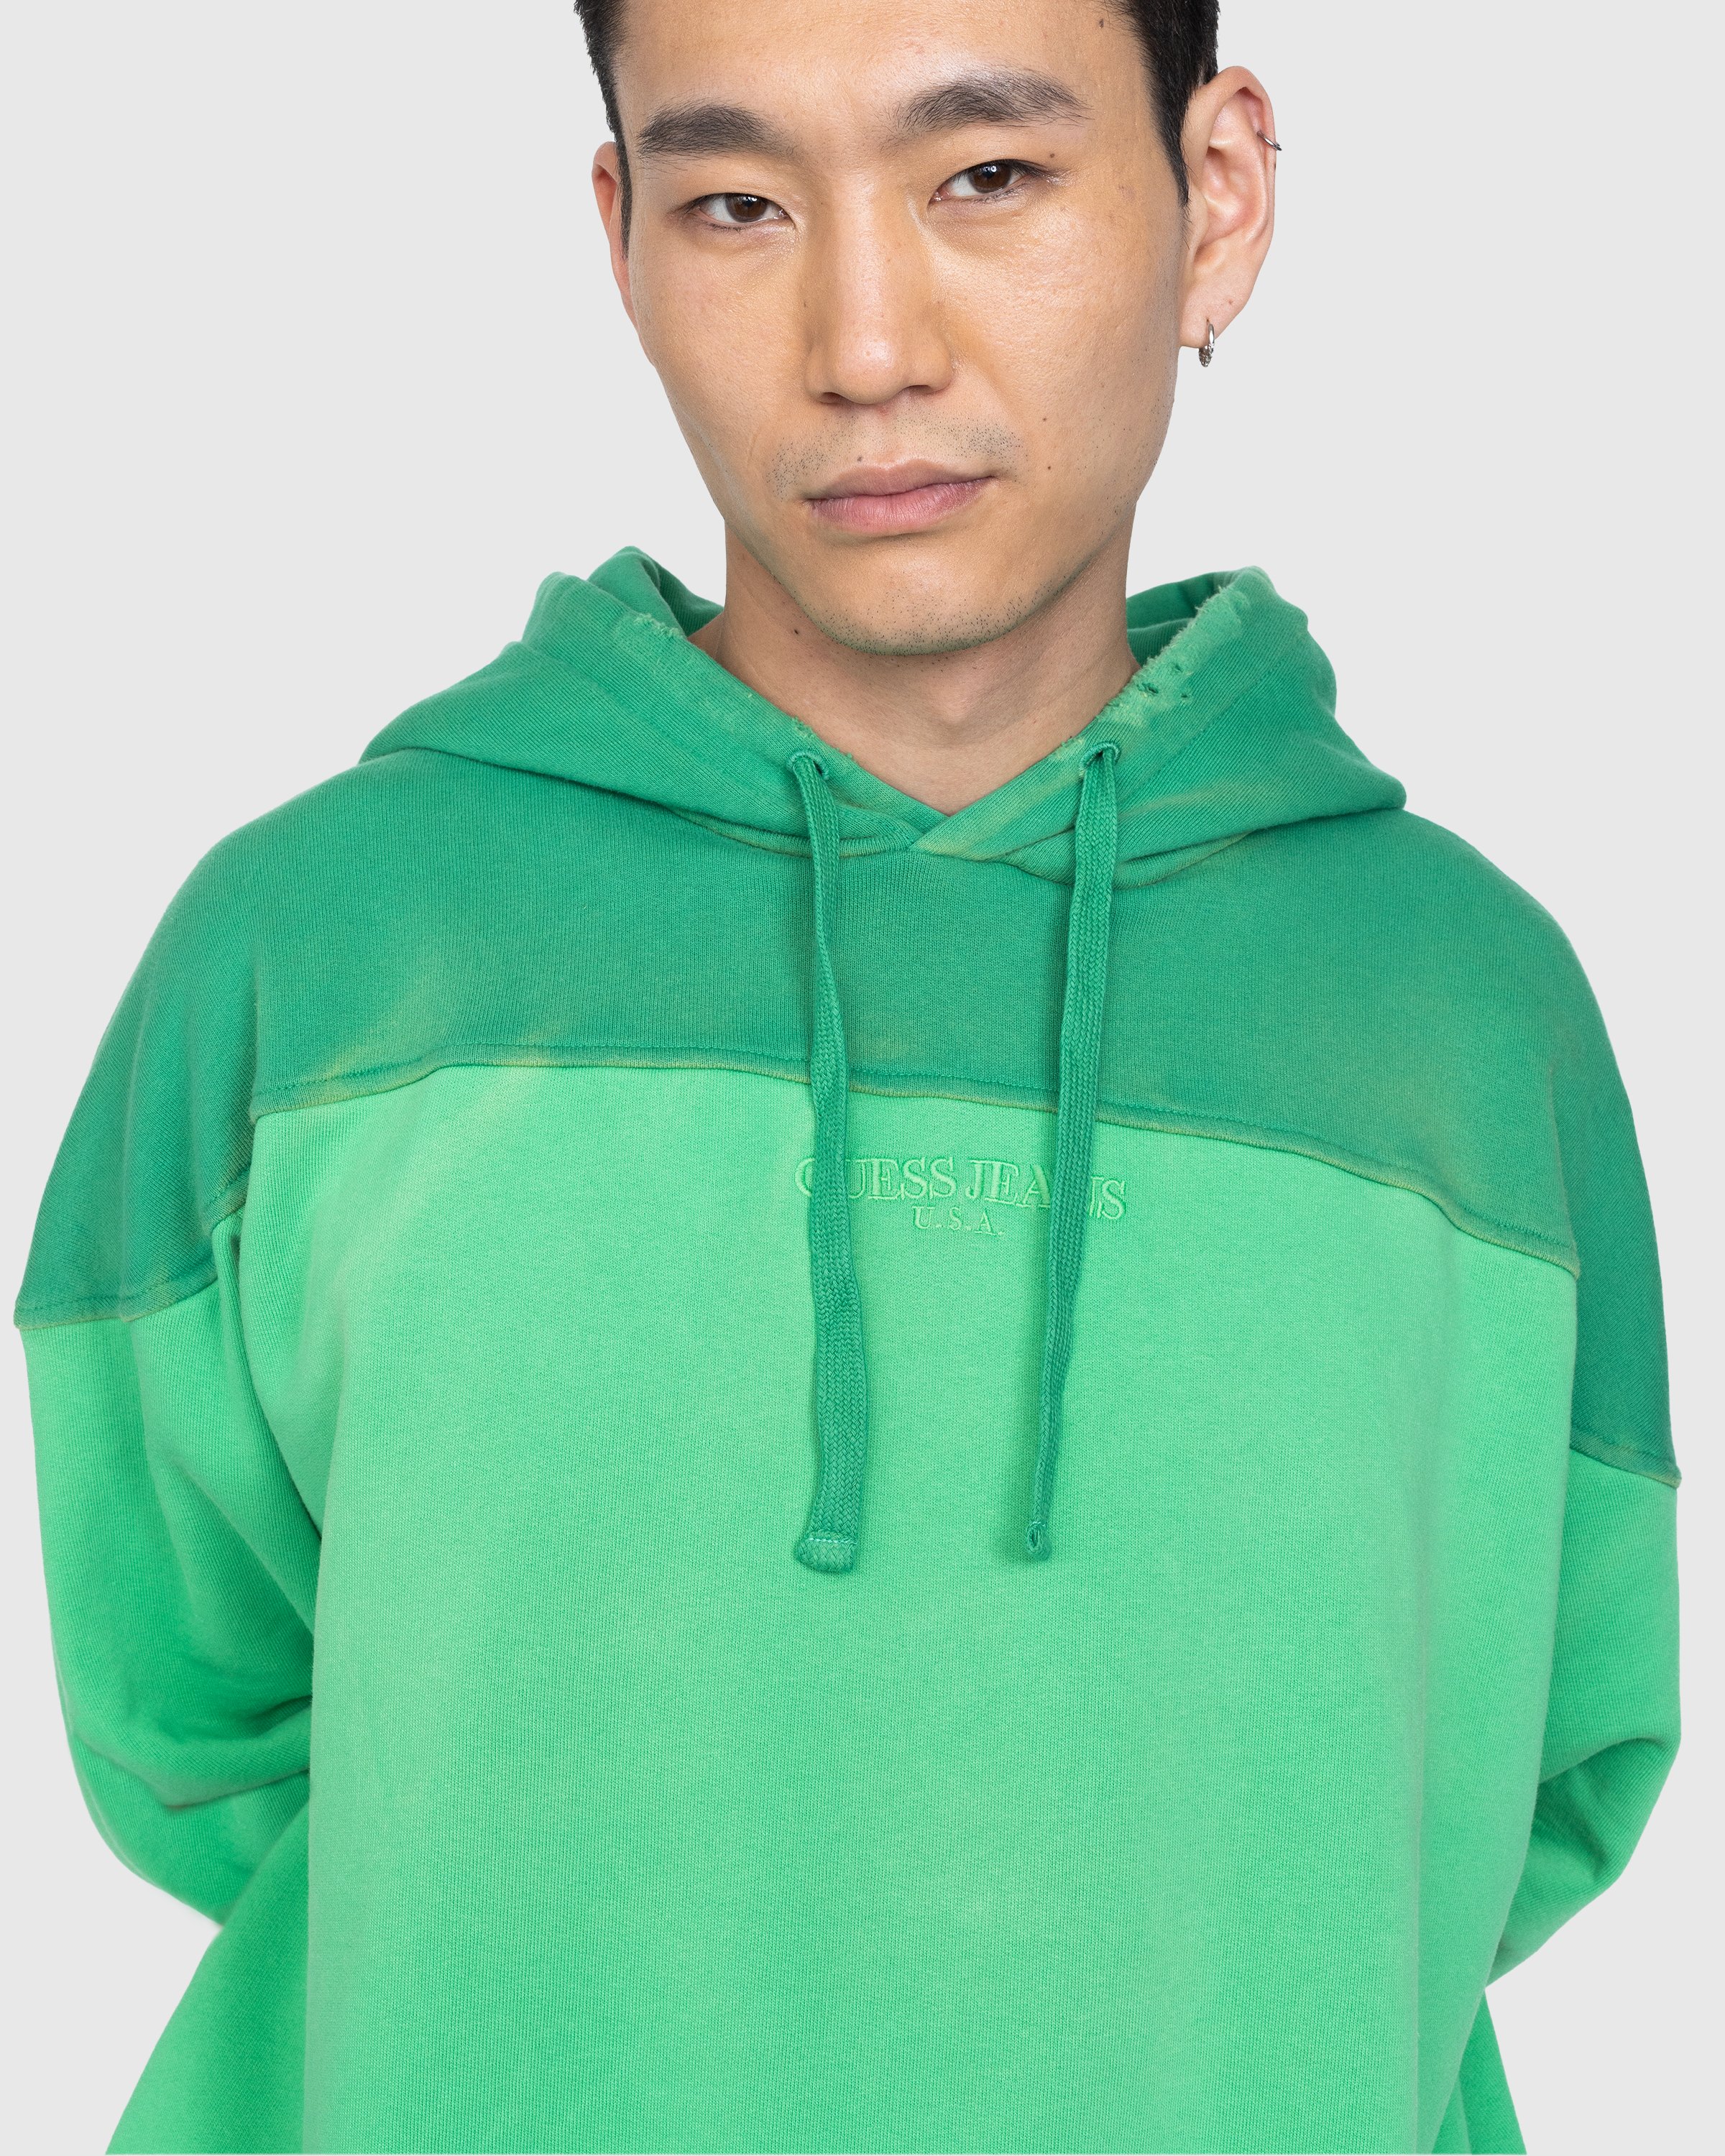 Guess USA - Two-Tone Hoodie Honeydew - Clothing - Green - Image 4